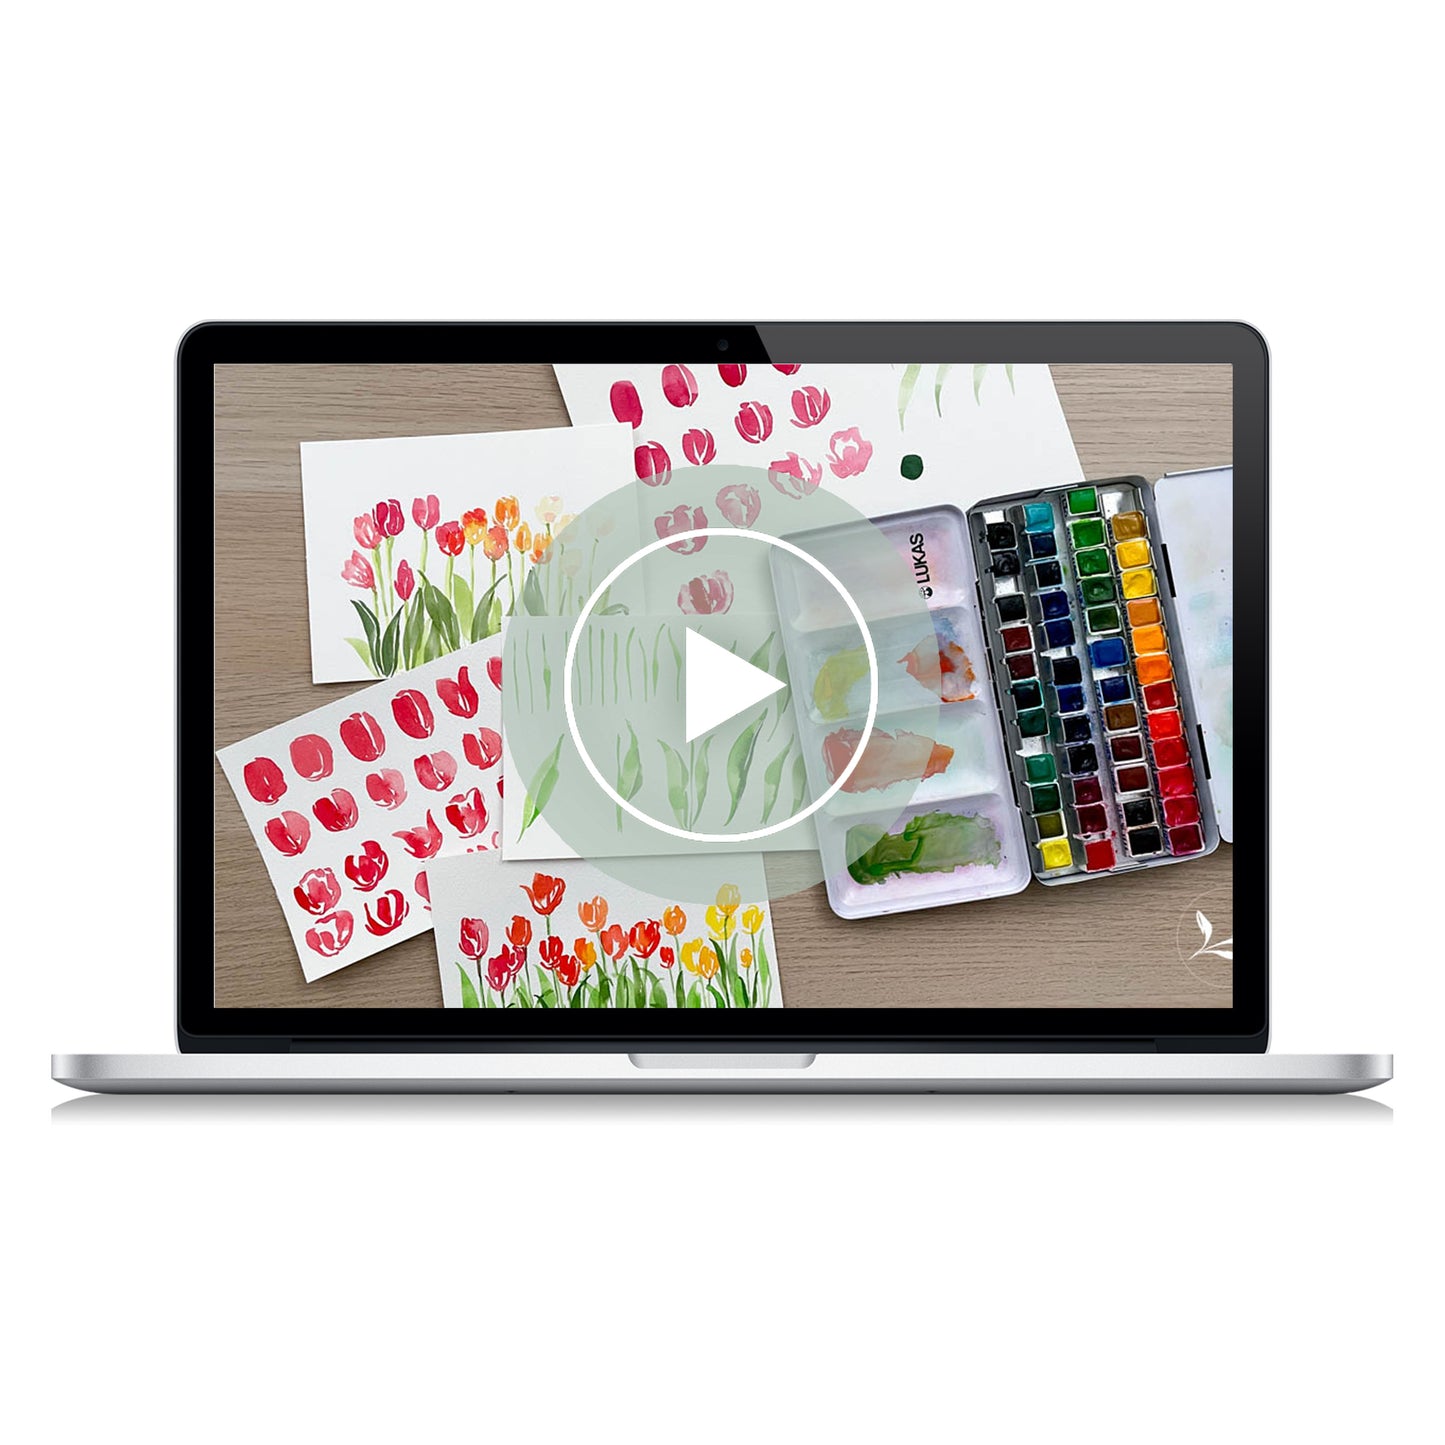 how to paint: watercolor tulips